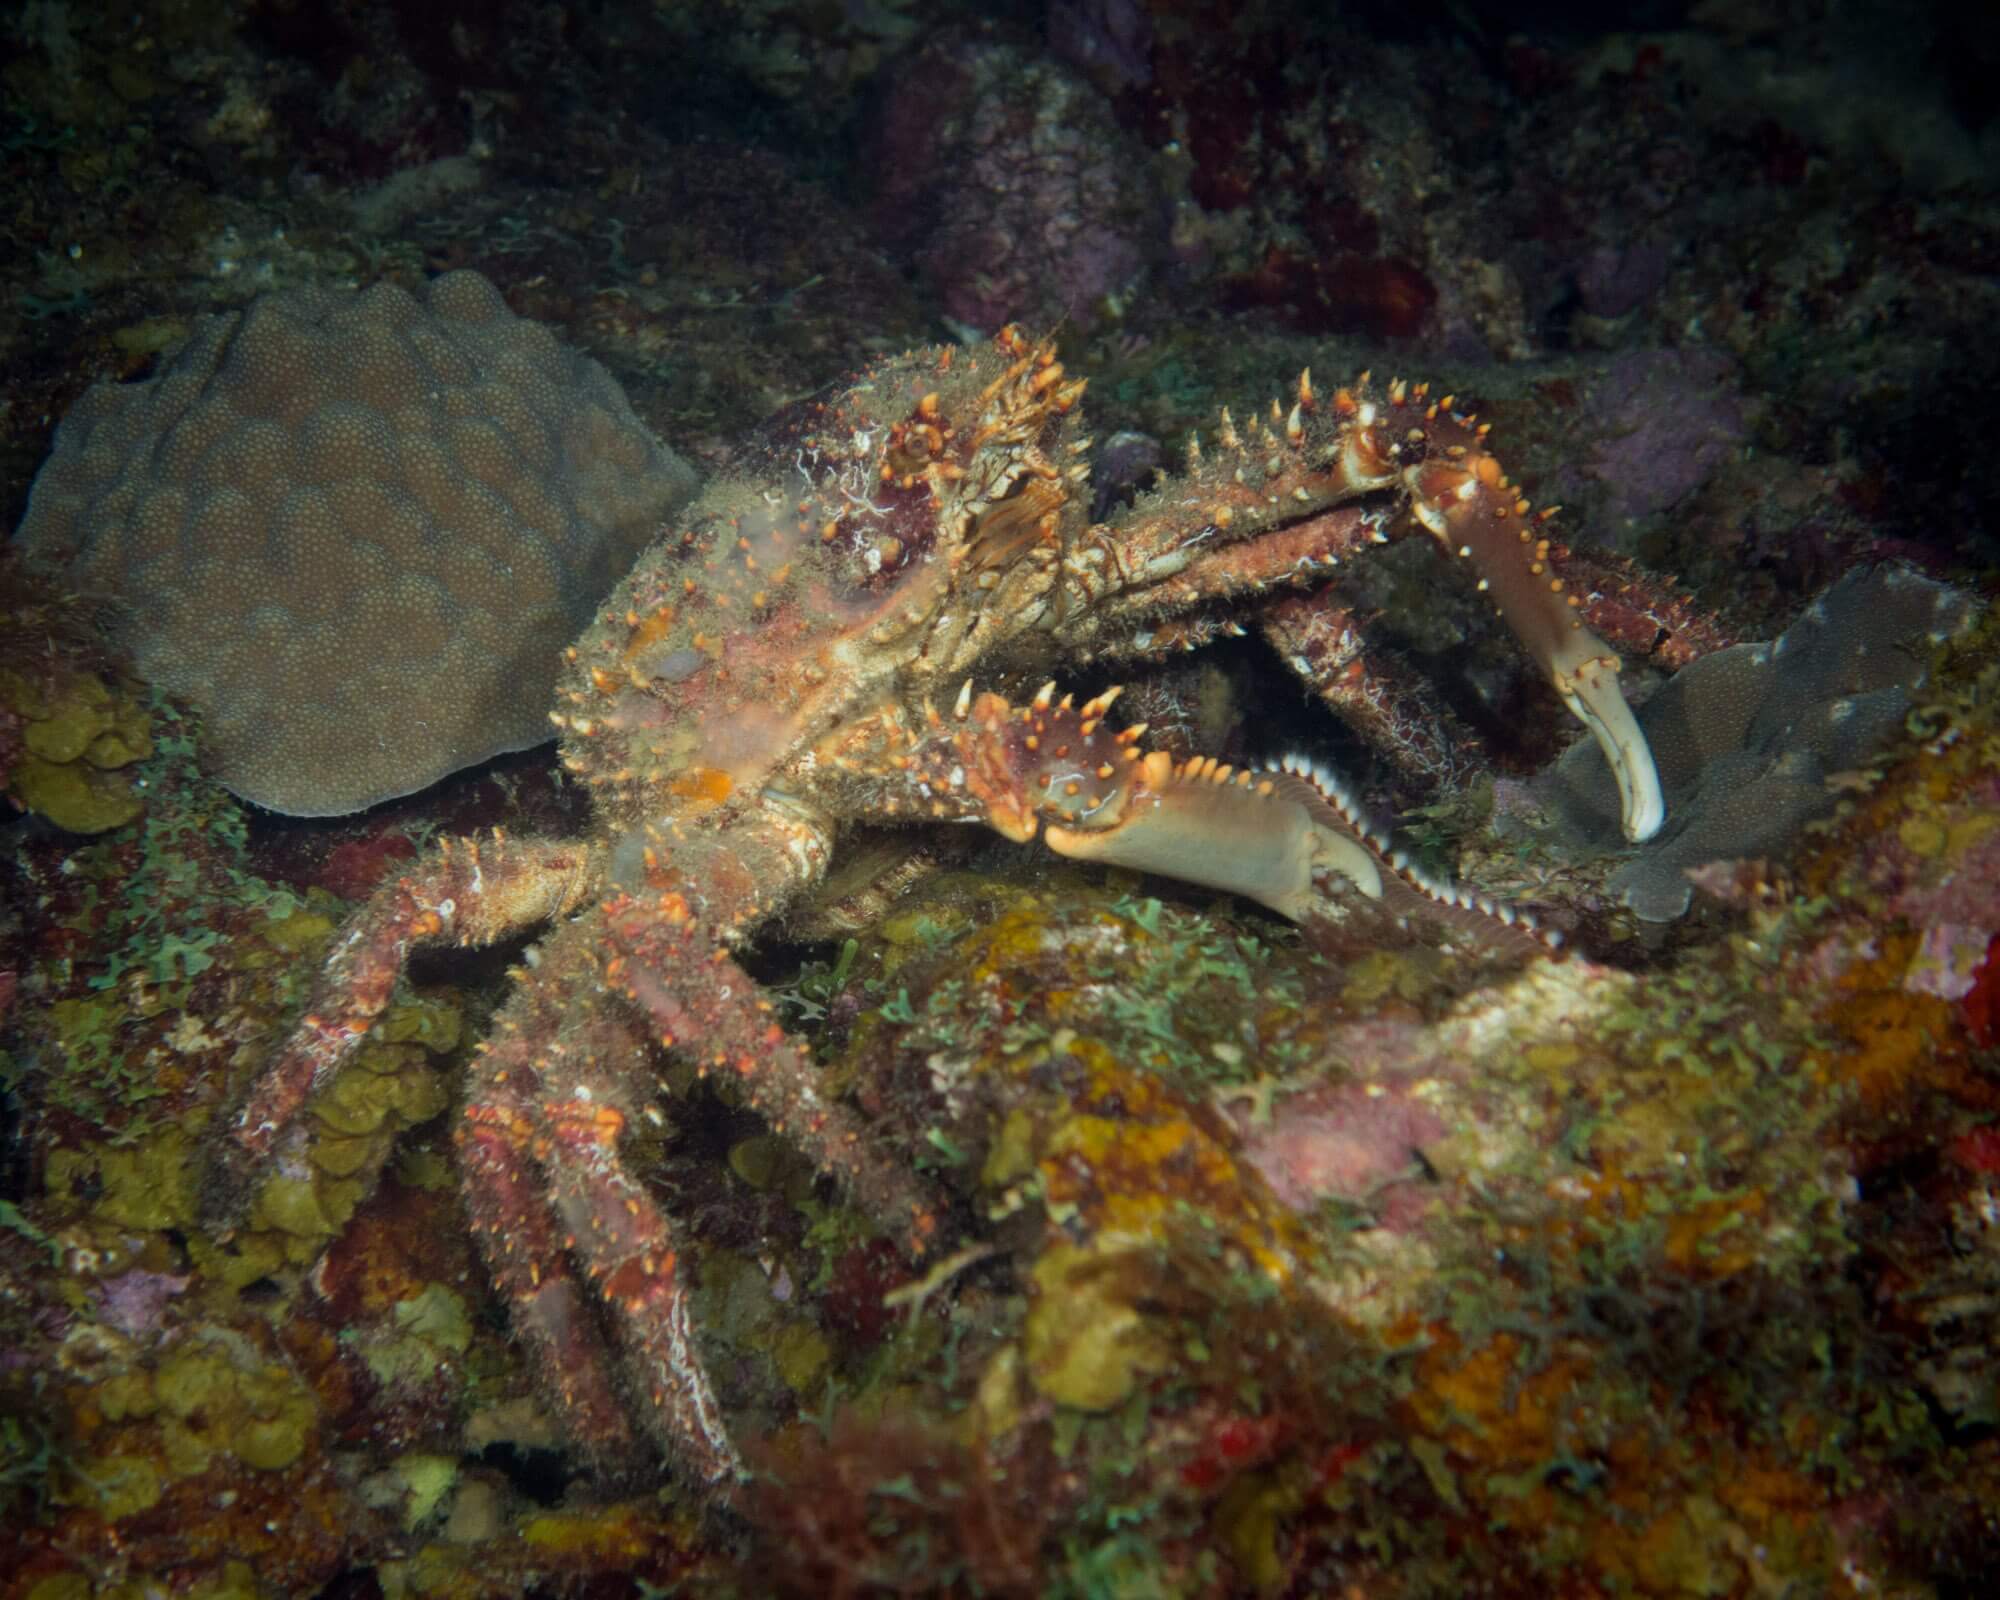 A hairy clinging crab catching a bearded fireworm in St. Kitts